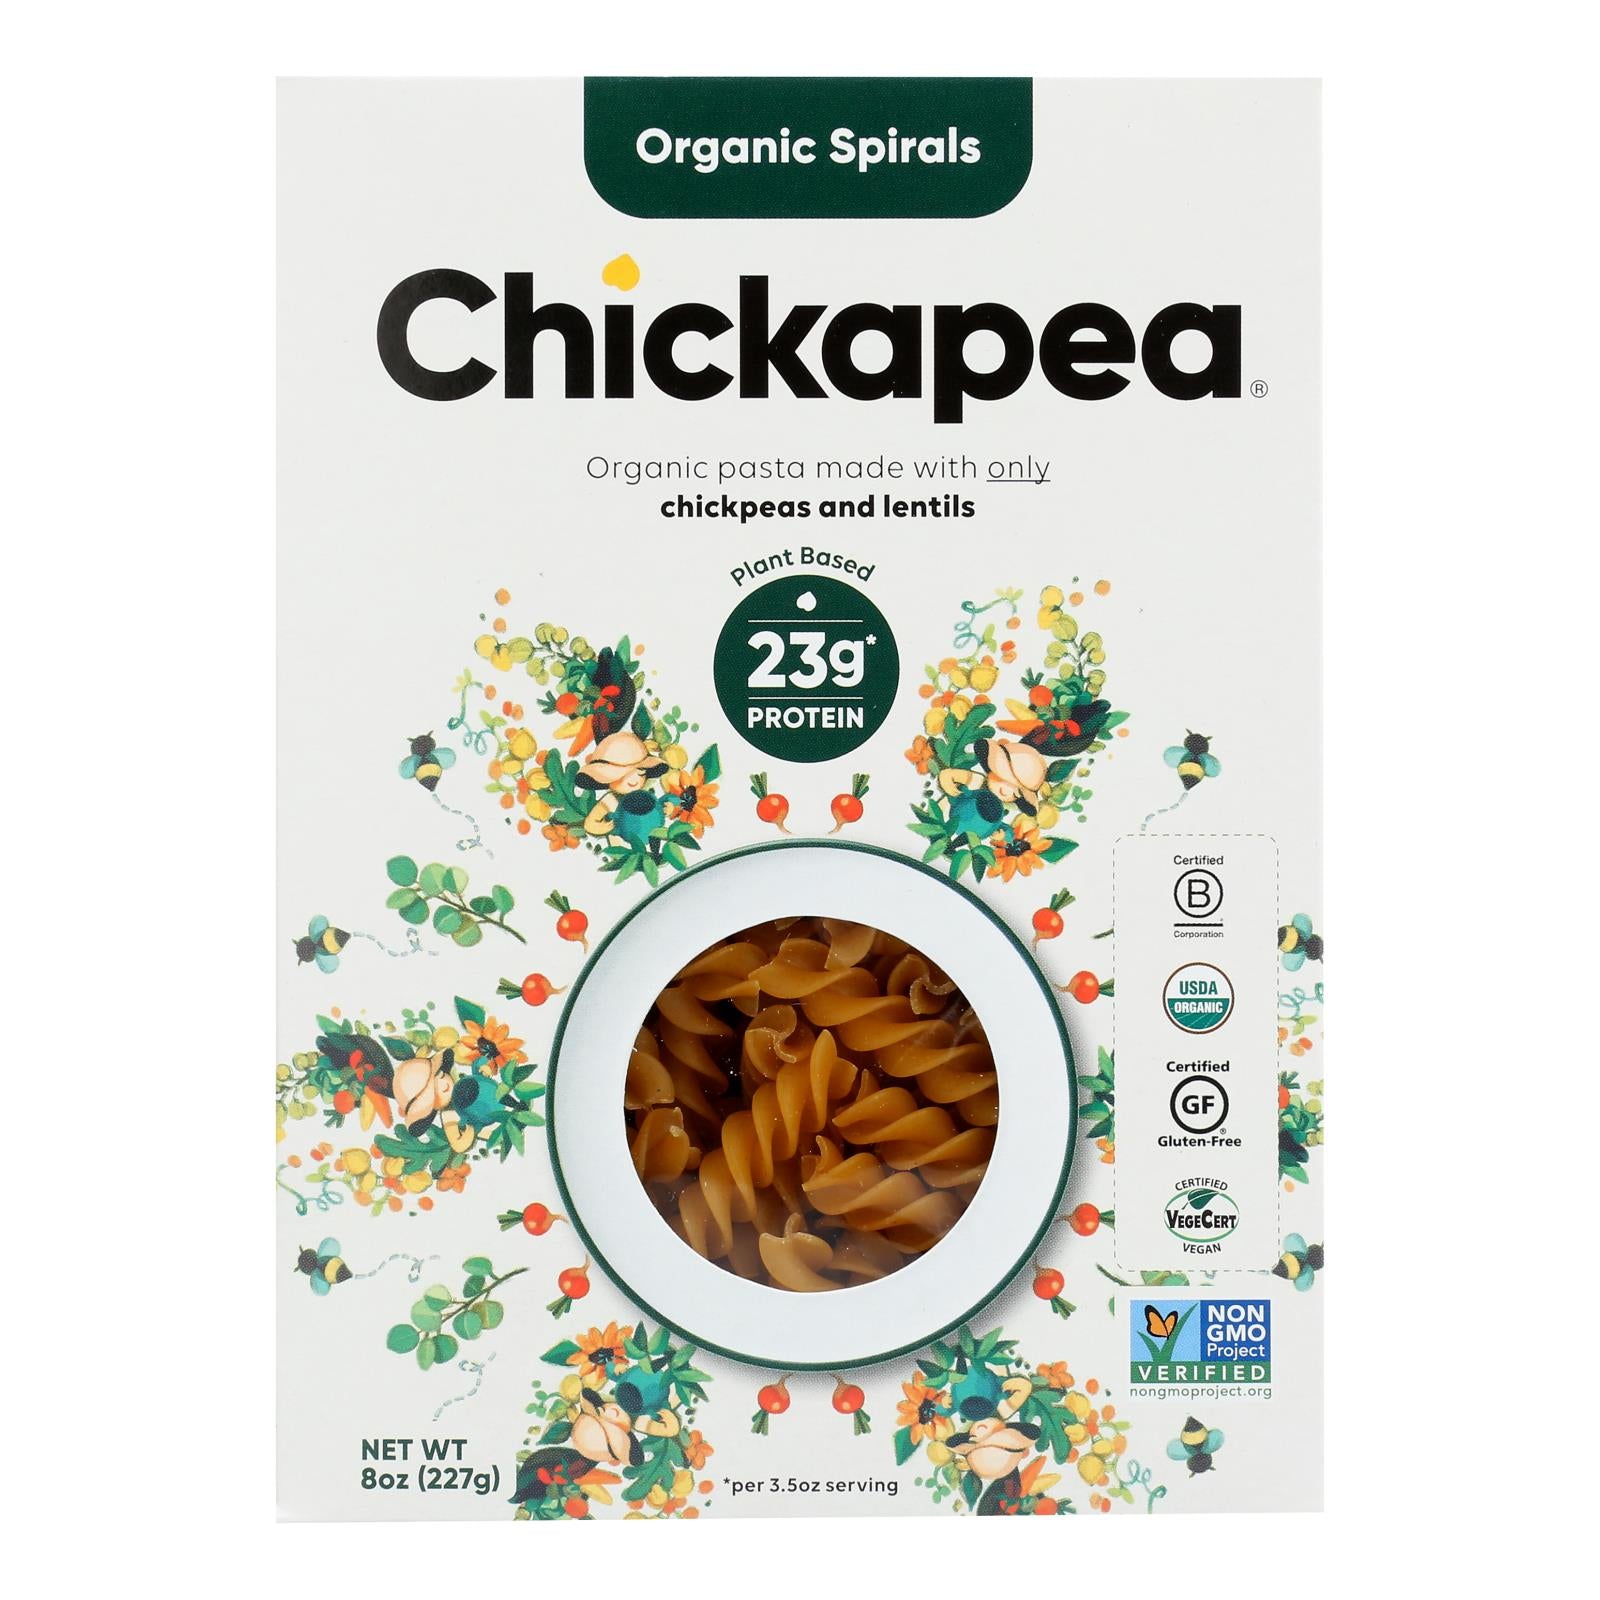 Chickapea Pasta, Chickapea Pasta - Pasta - Spirals - Case of 6 - 8 oz. (Pack of 6)